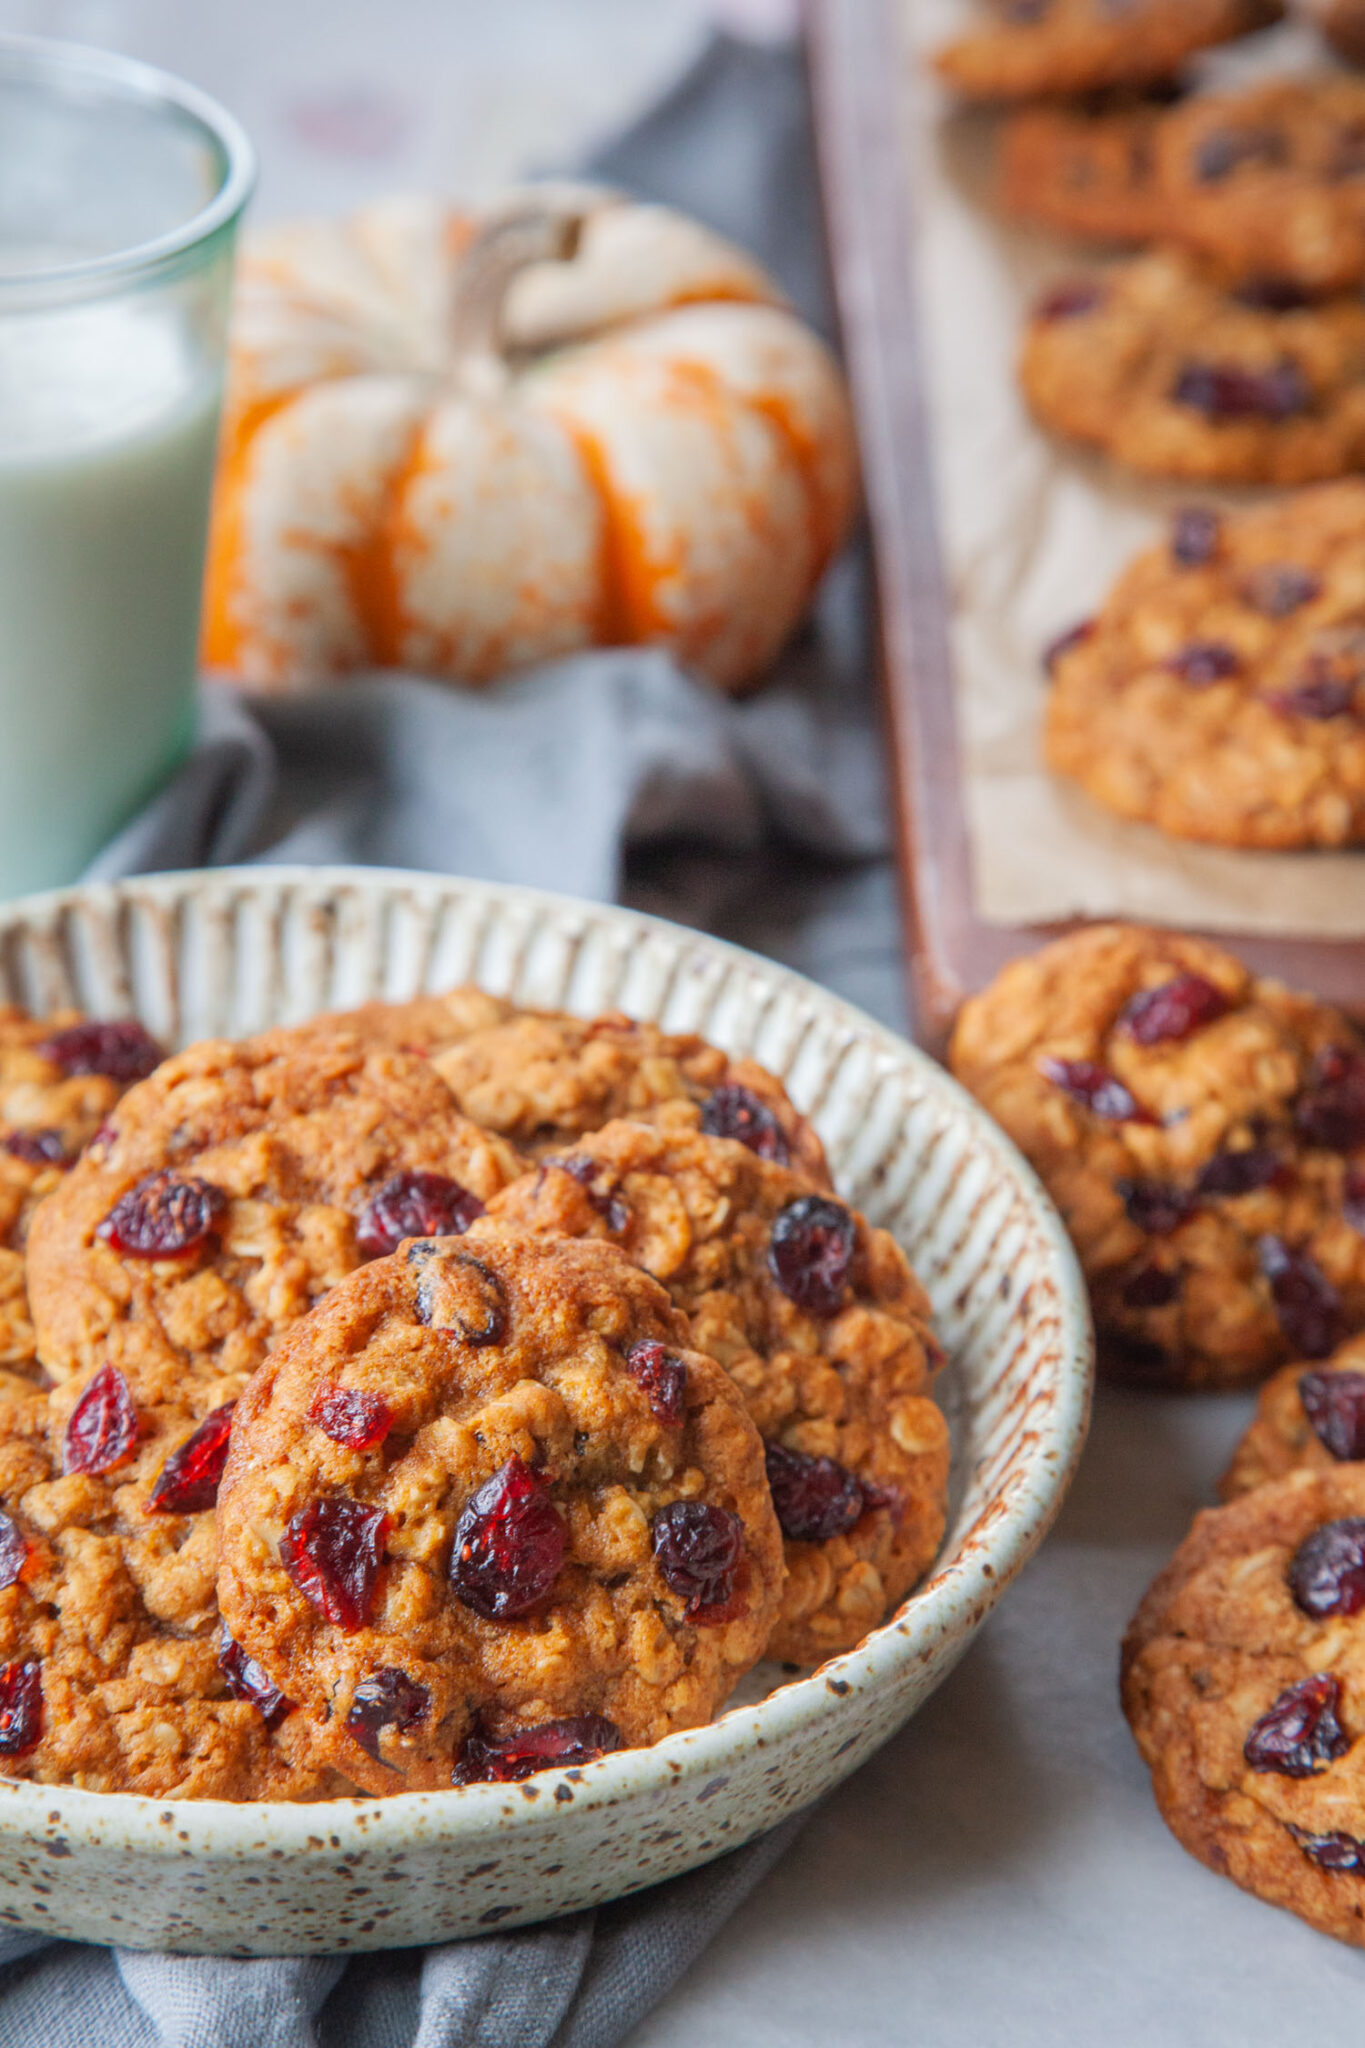 A plate of pumpkin oatmeal cranberry cookies with more cookies next to it, and a glass of milk behind it.